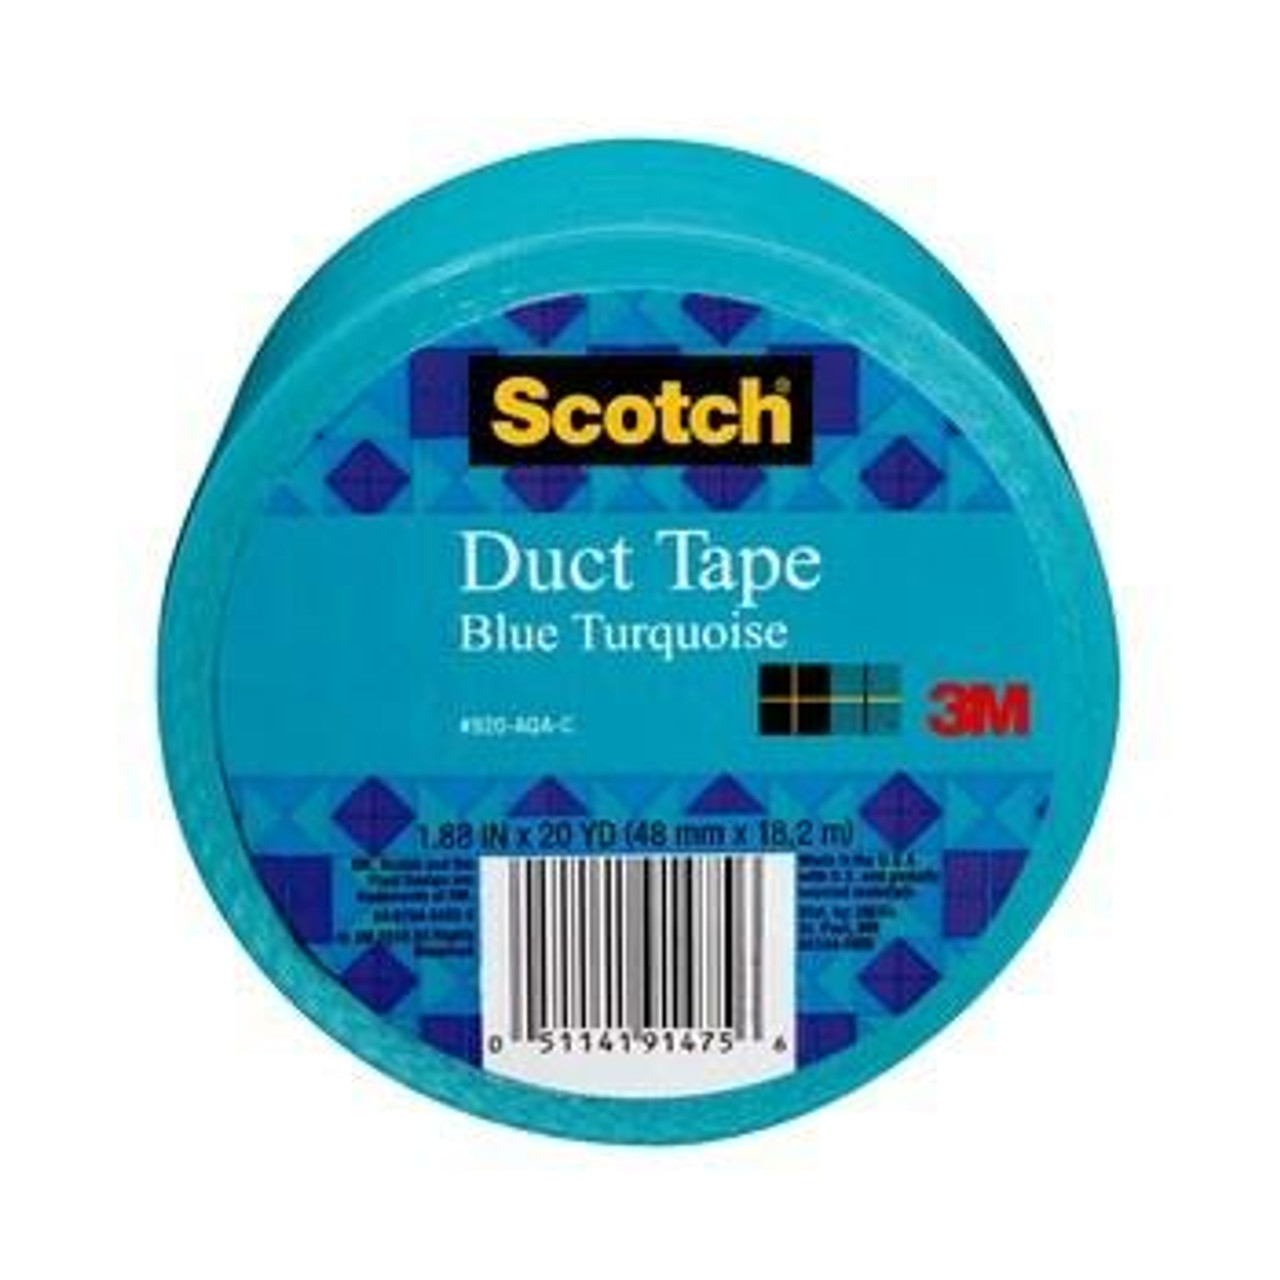 3M Scotch Duct Tape for Artists Red 1.88in x 20yd